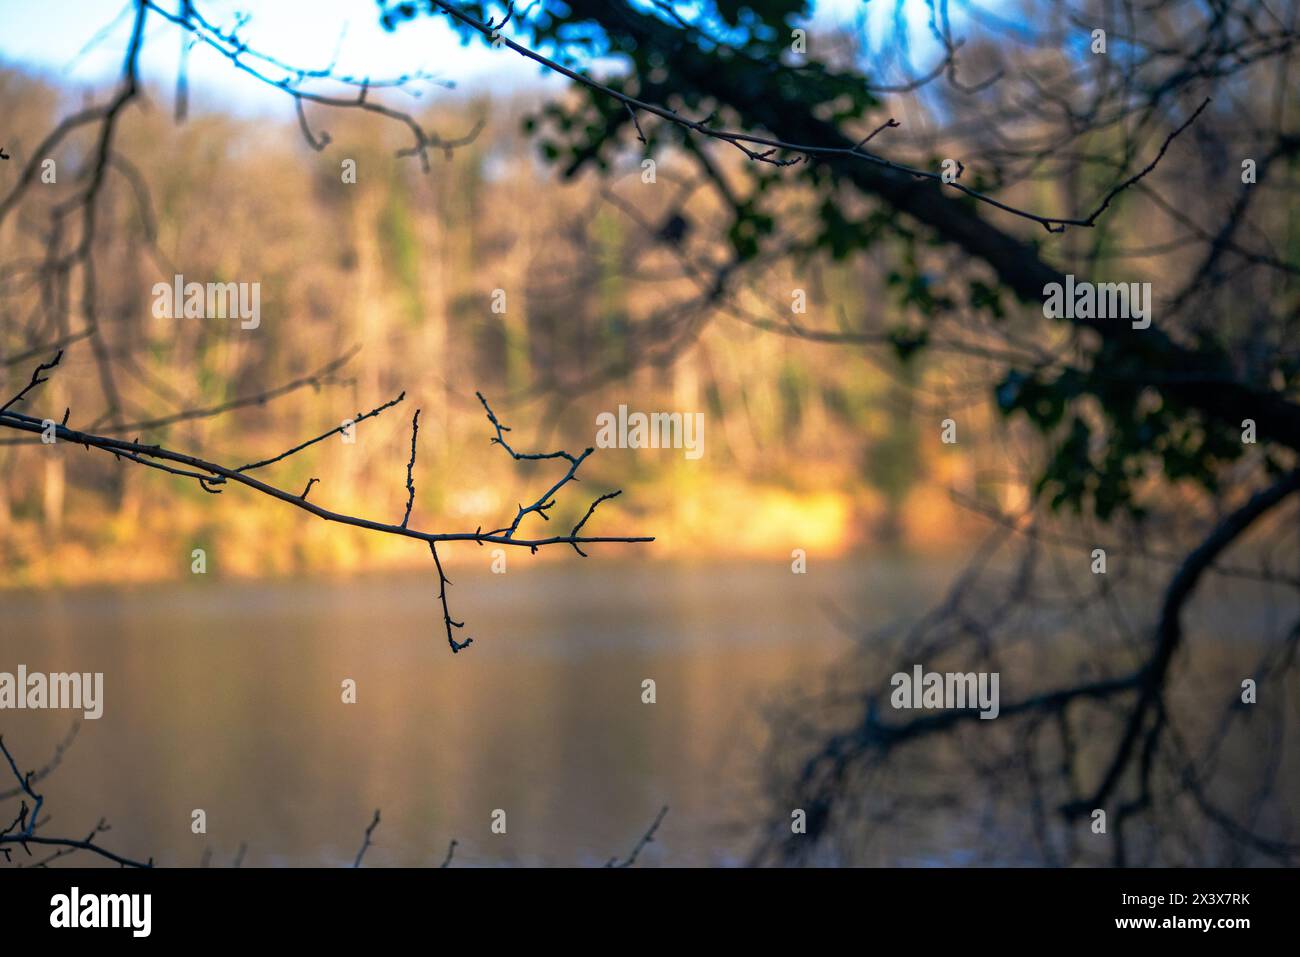 Tree branches frame a serene lake view, creating a tranquil and picturesque scene of nature's beauty. Stock Photo